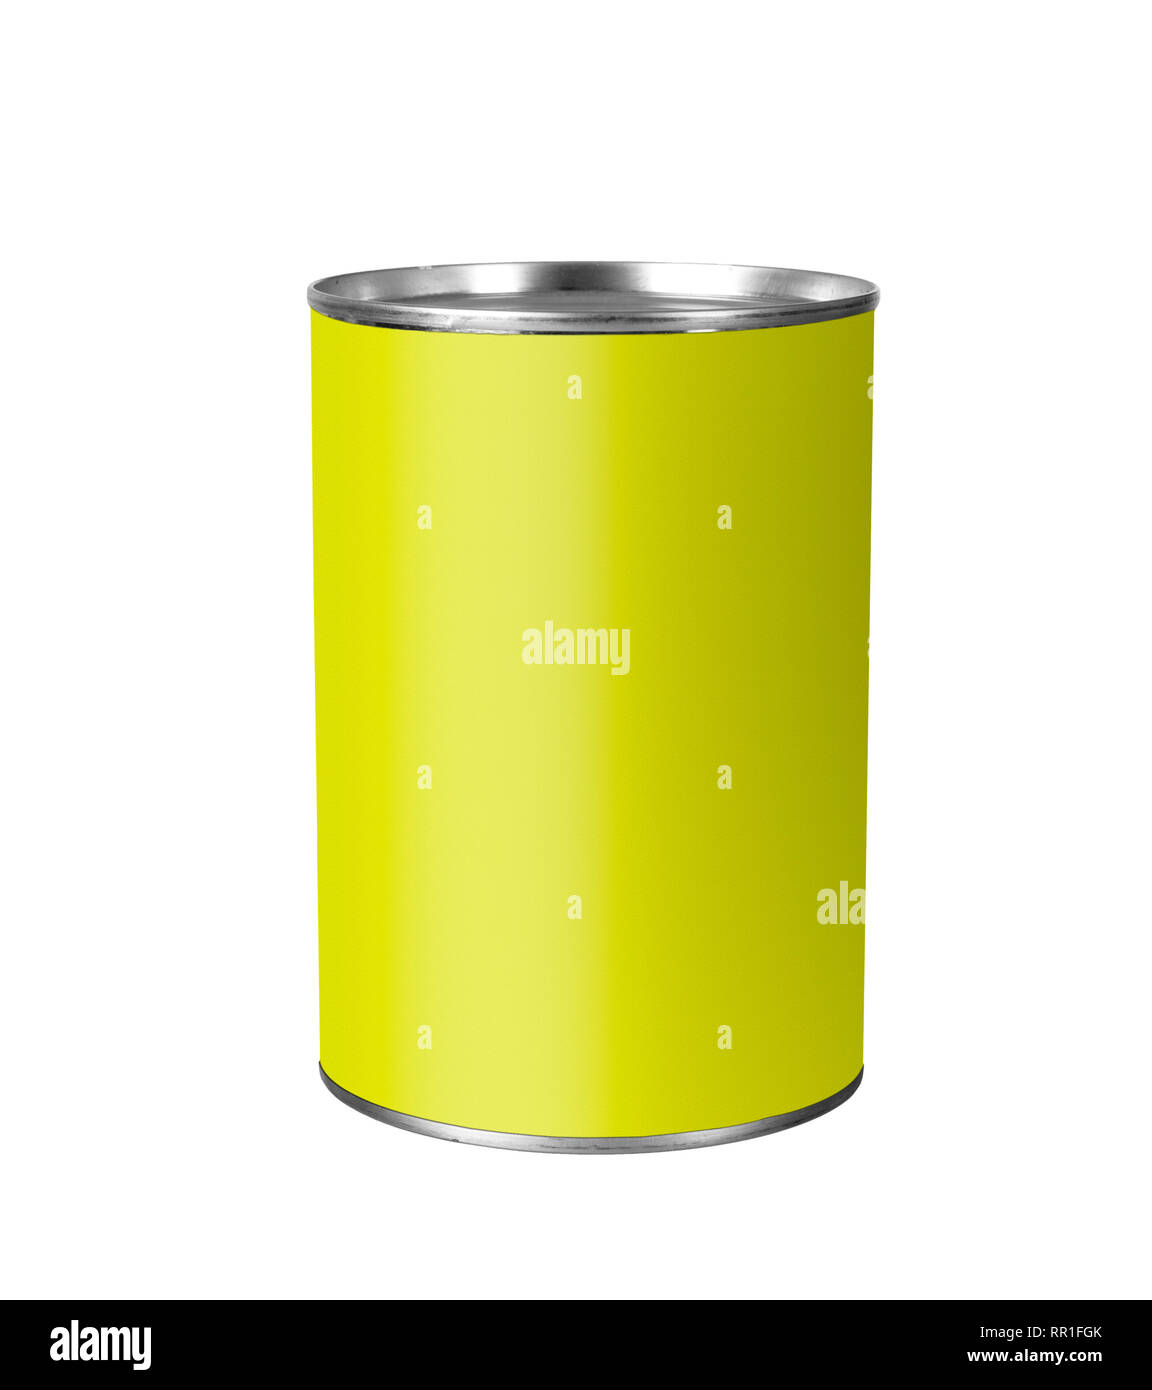 Tin can with yellow label isolated on white. Stock Photo